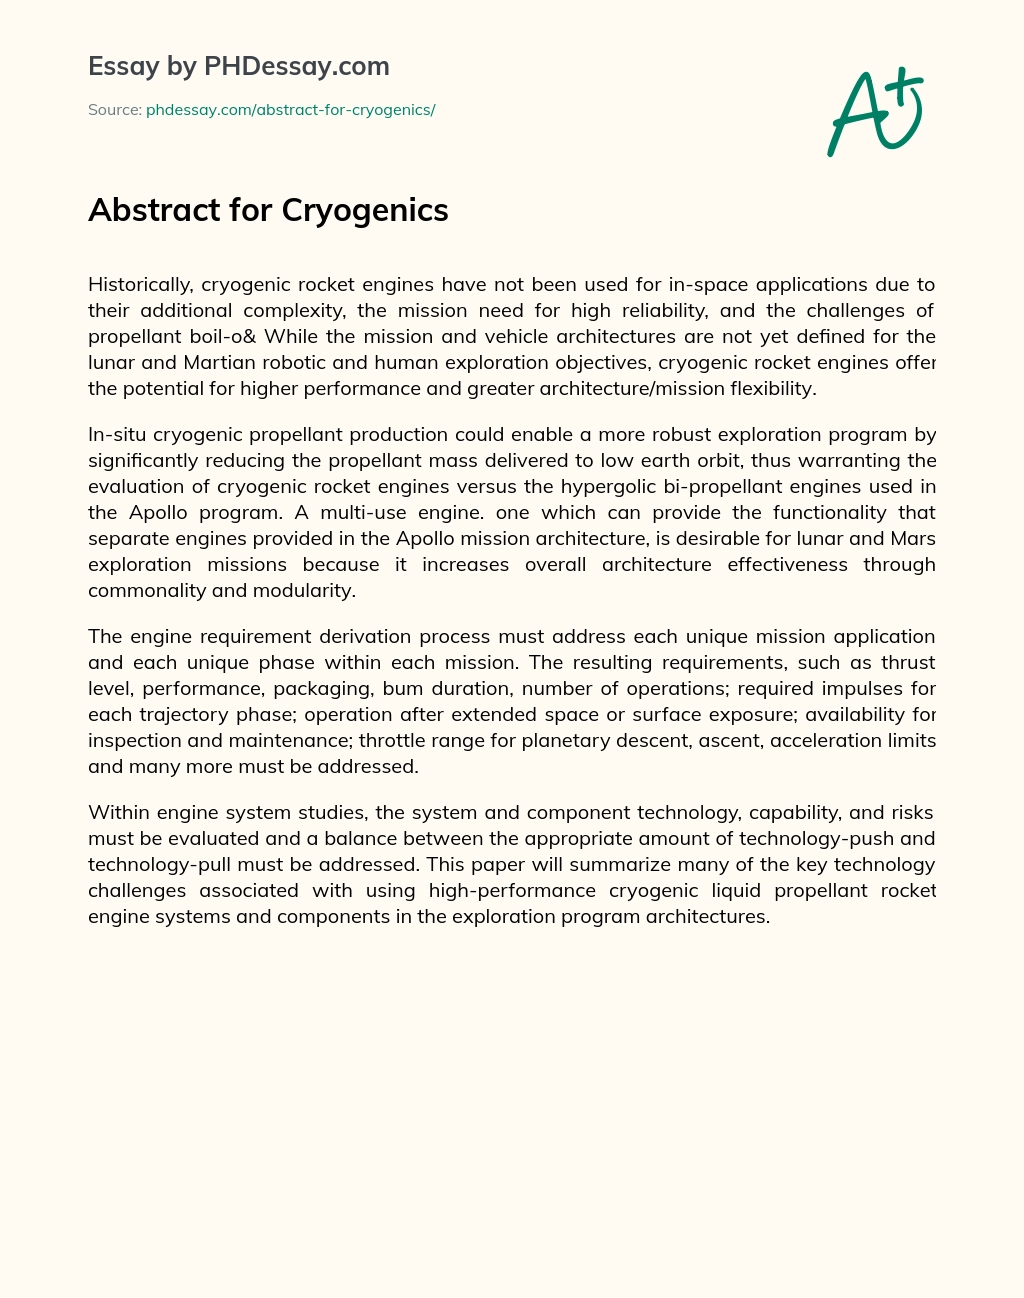 Abstract for Cryogenics essay